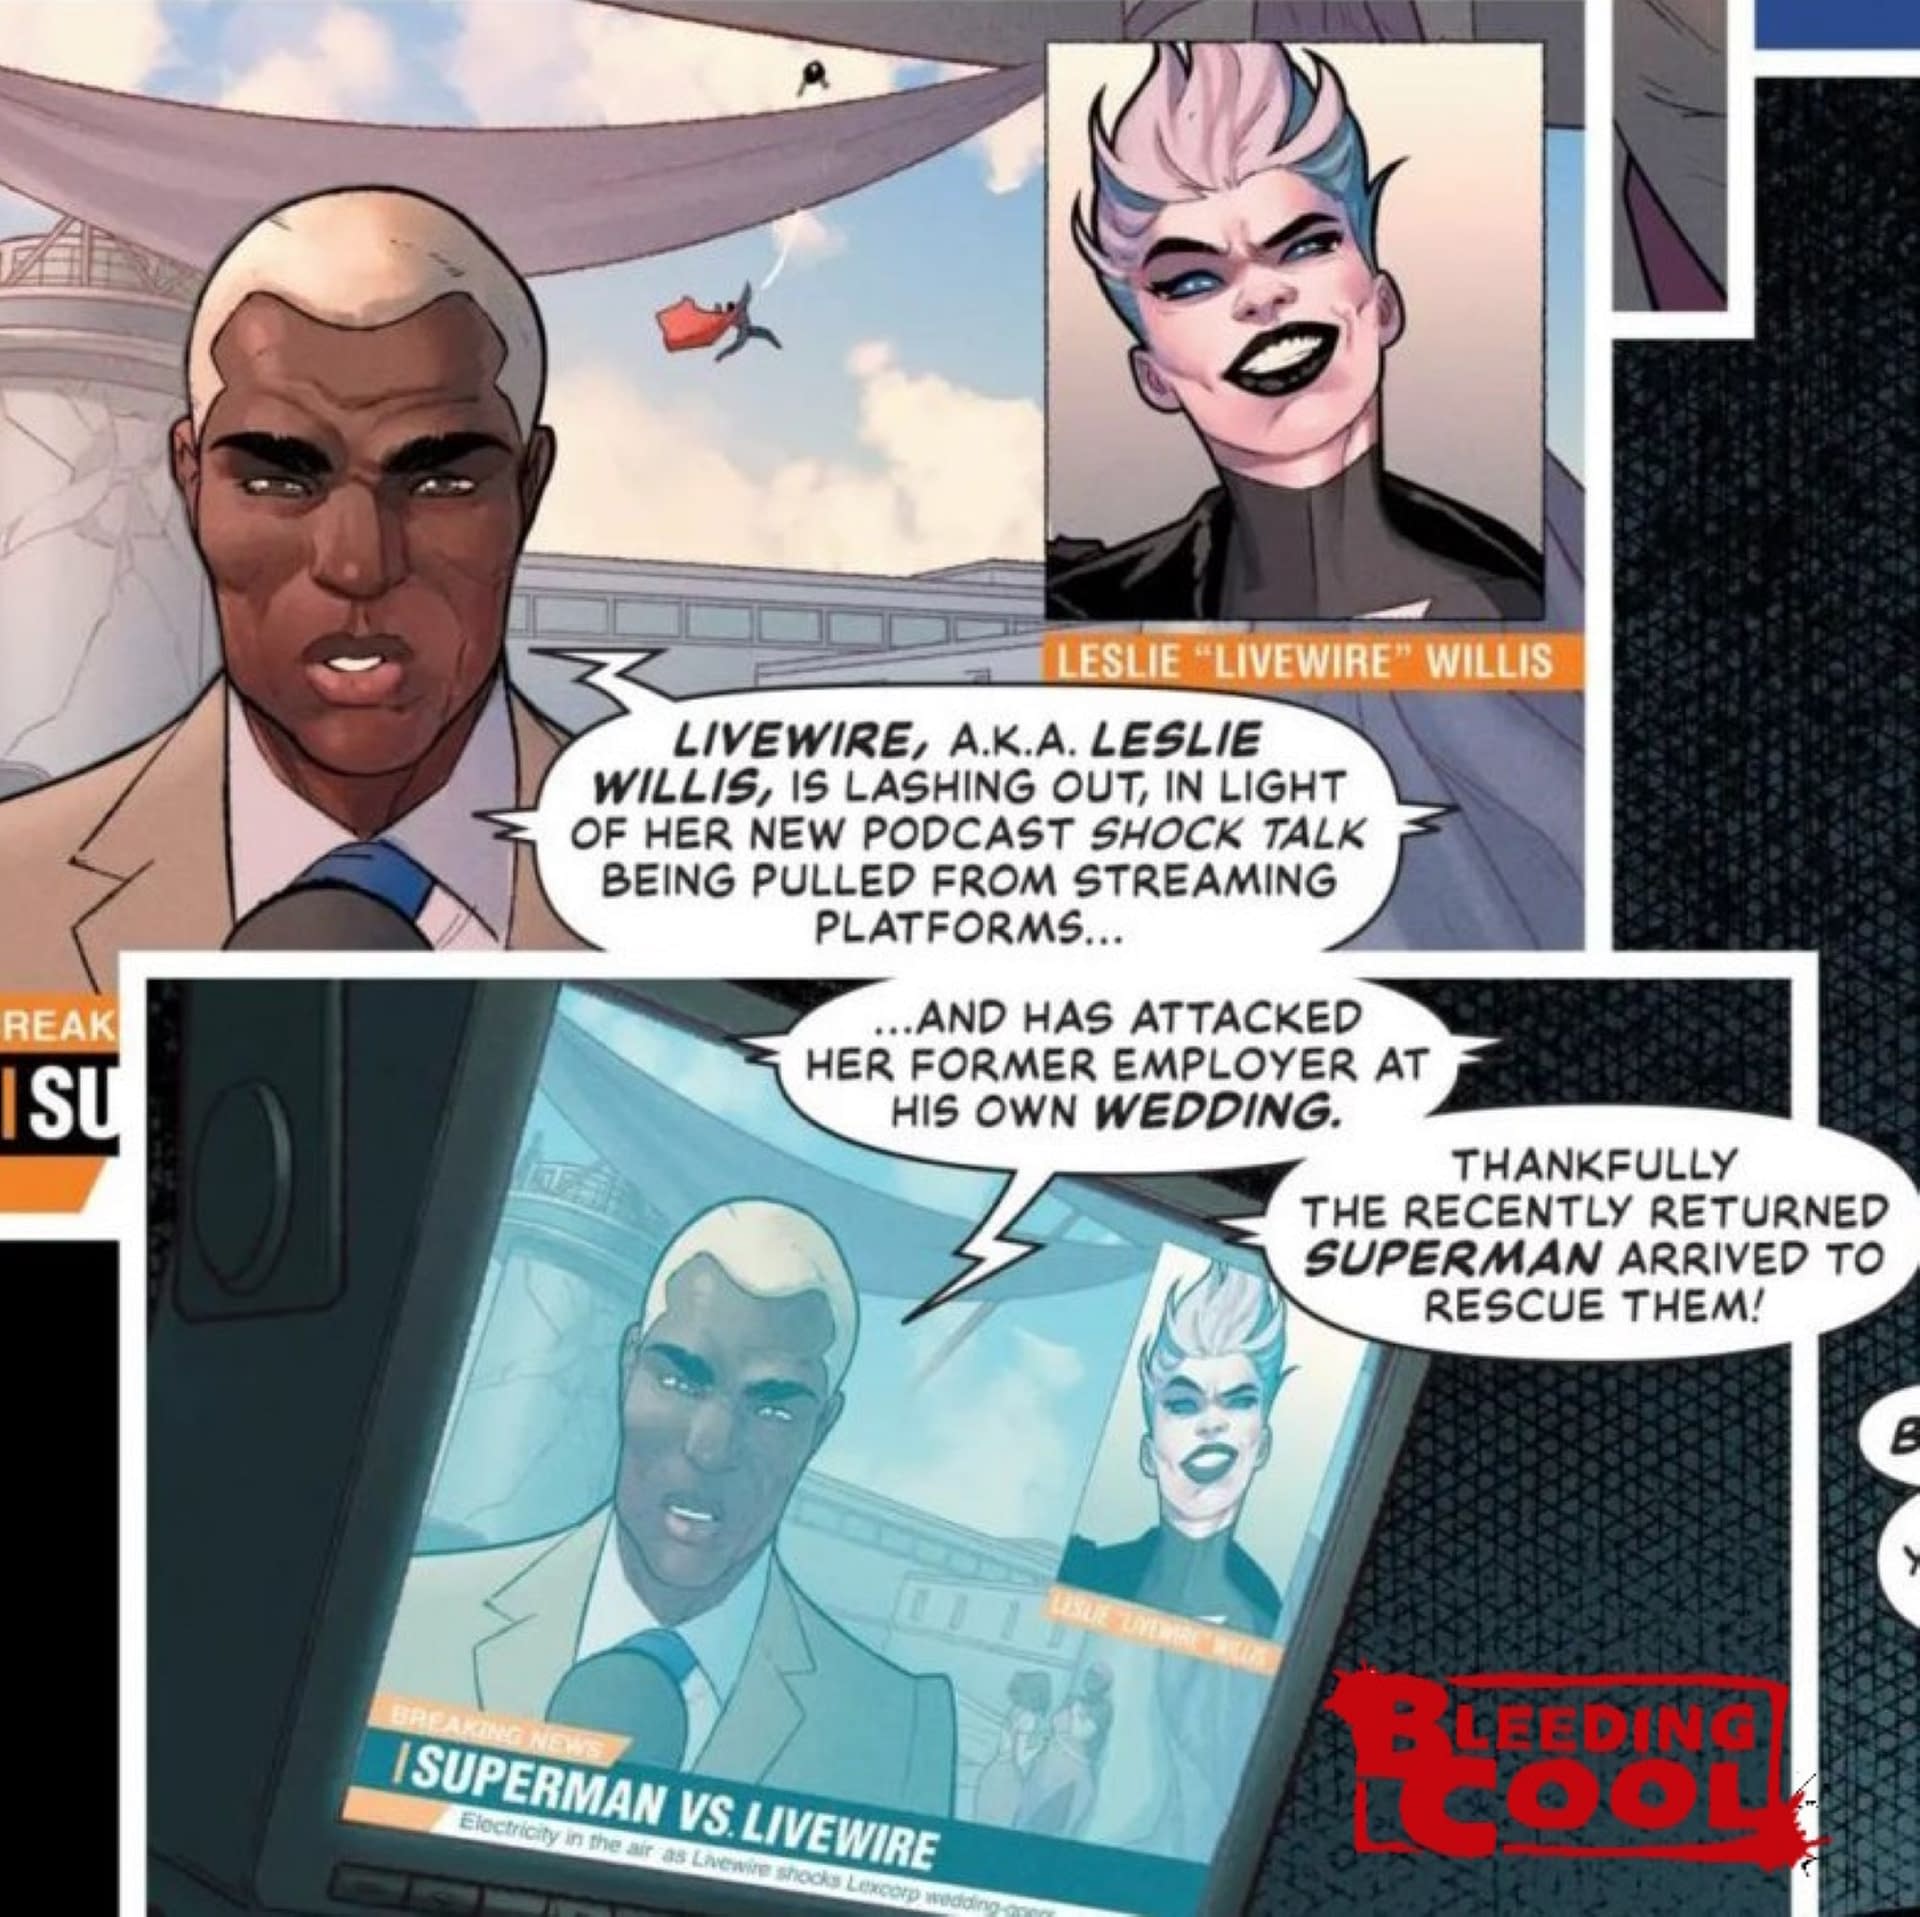 Livewire Is Now The Joe Rogan Of The DC Comics Universe